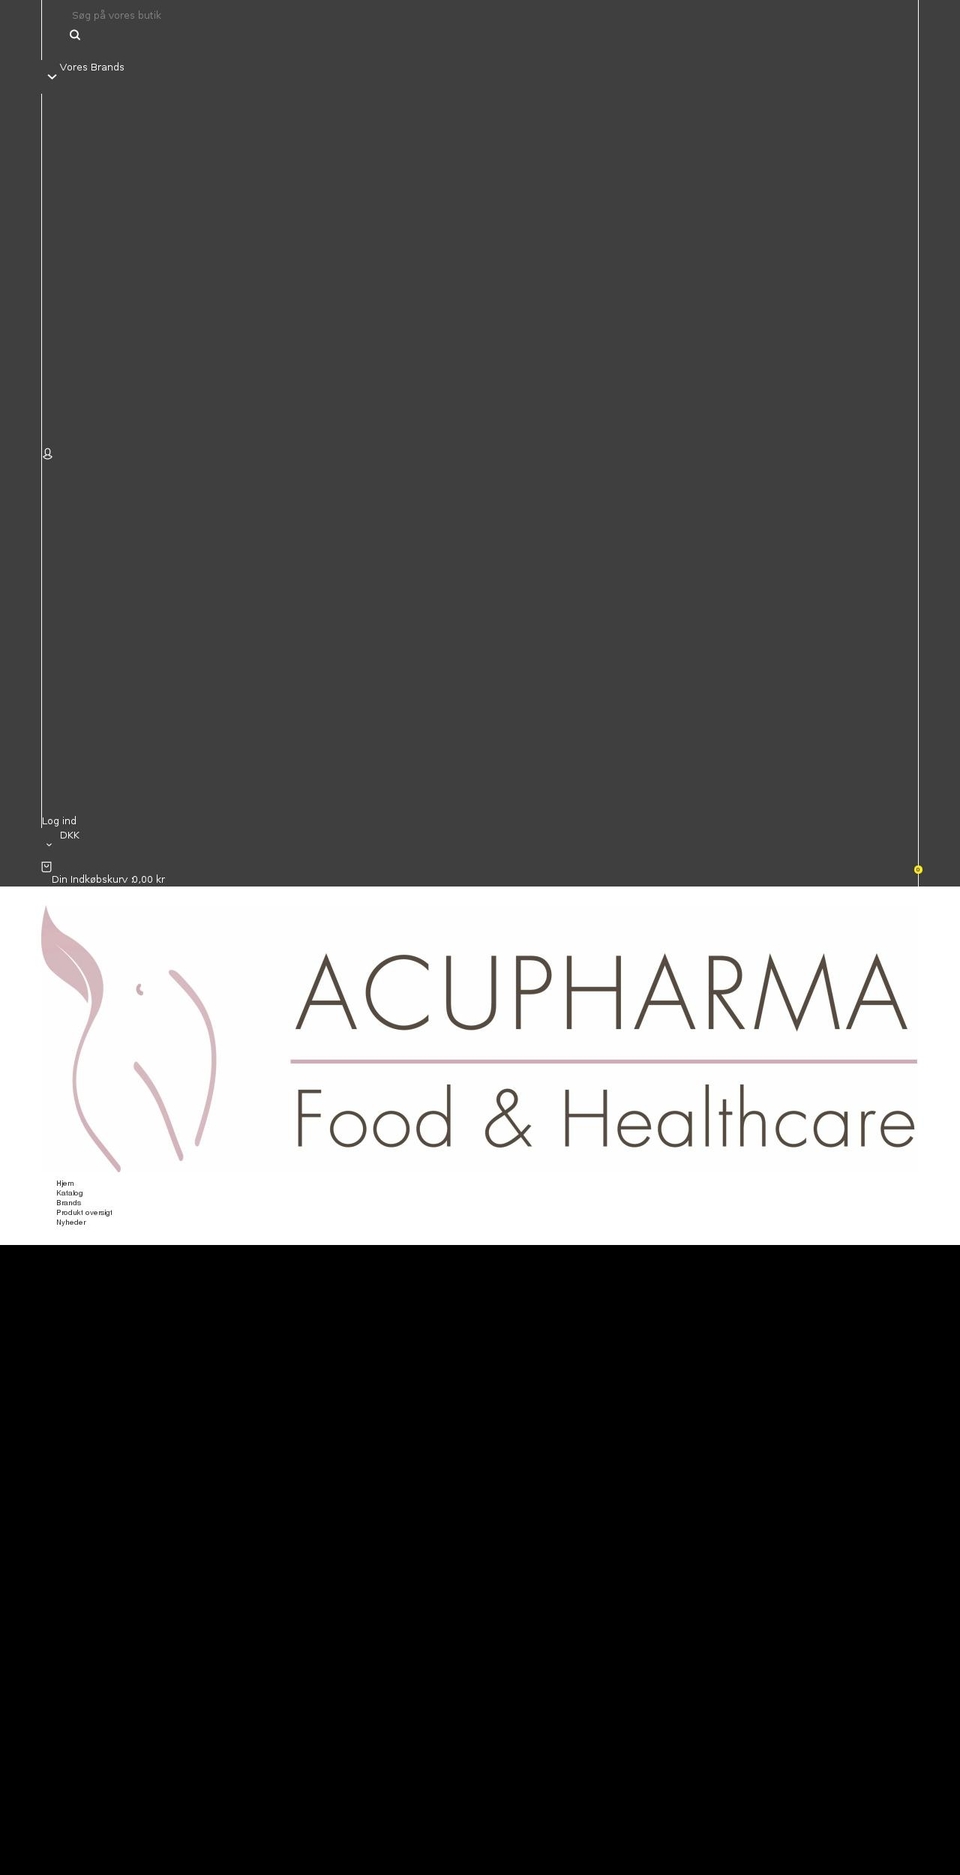 citrus Shopify theme site example acupharma.dk